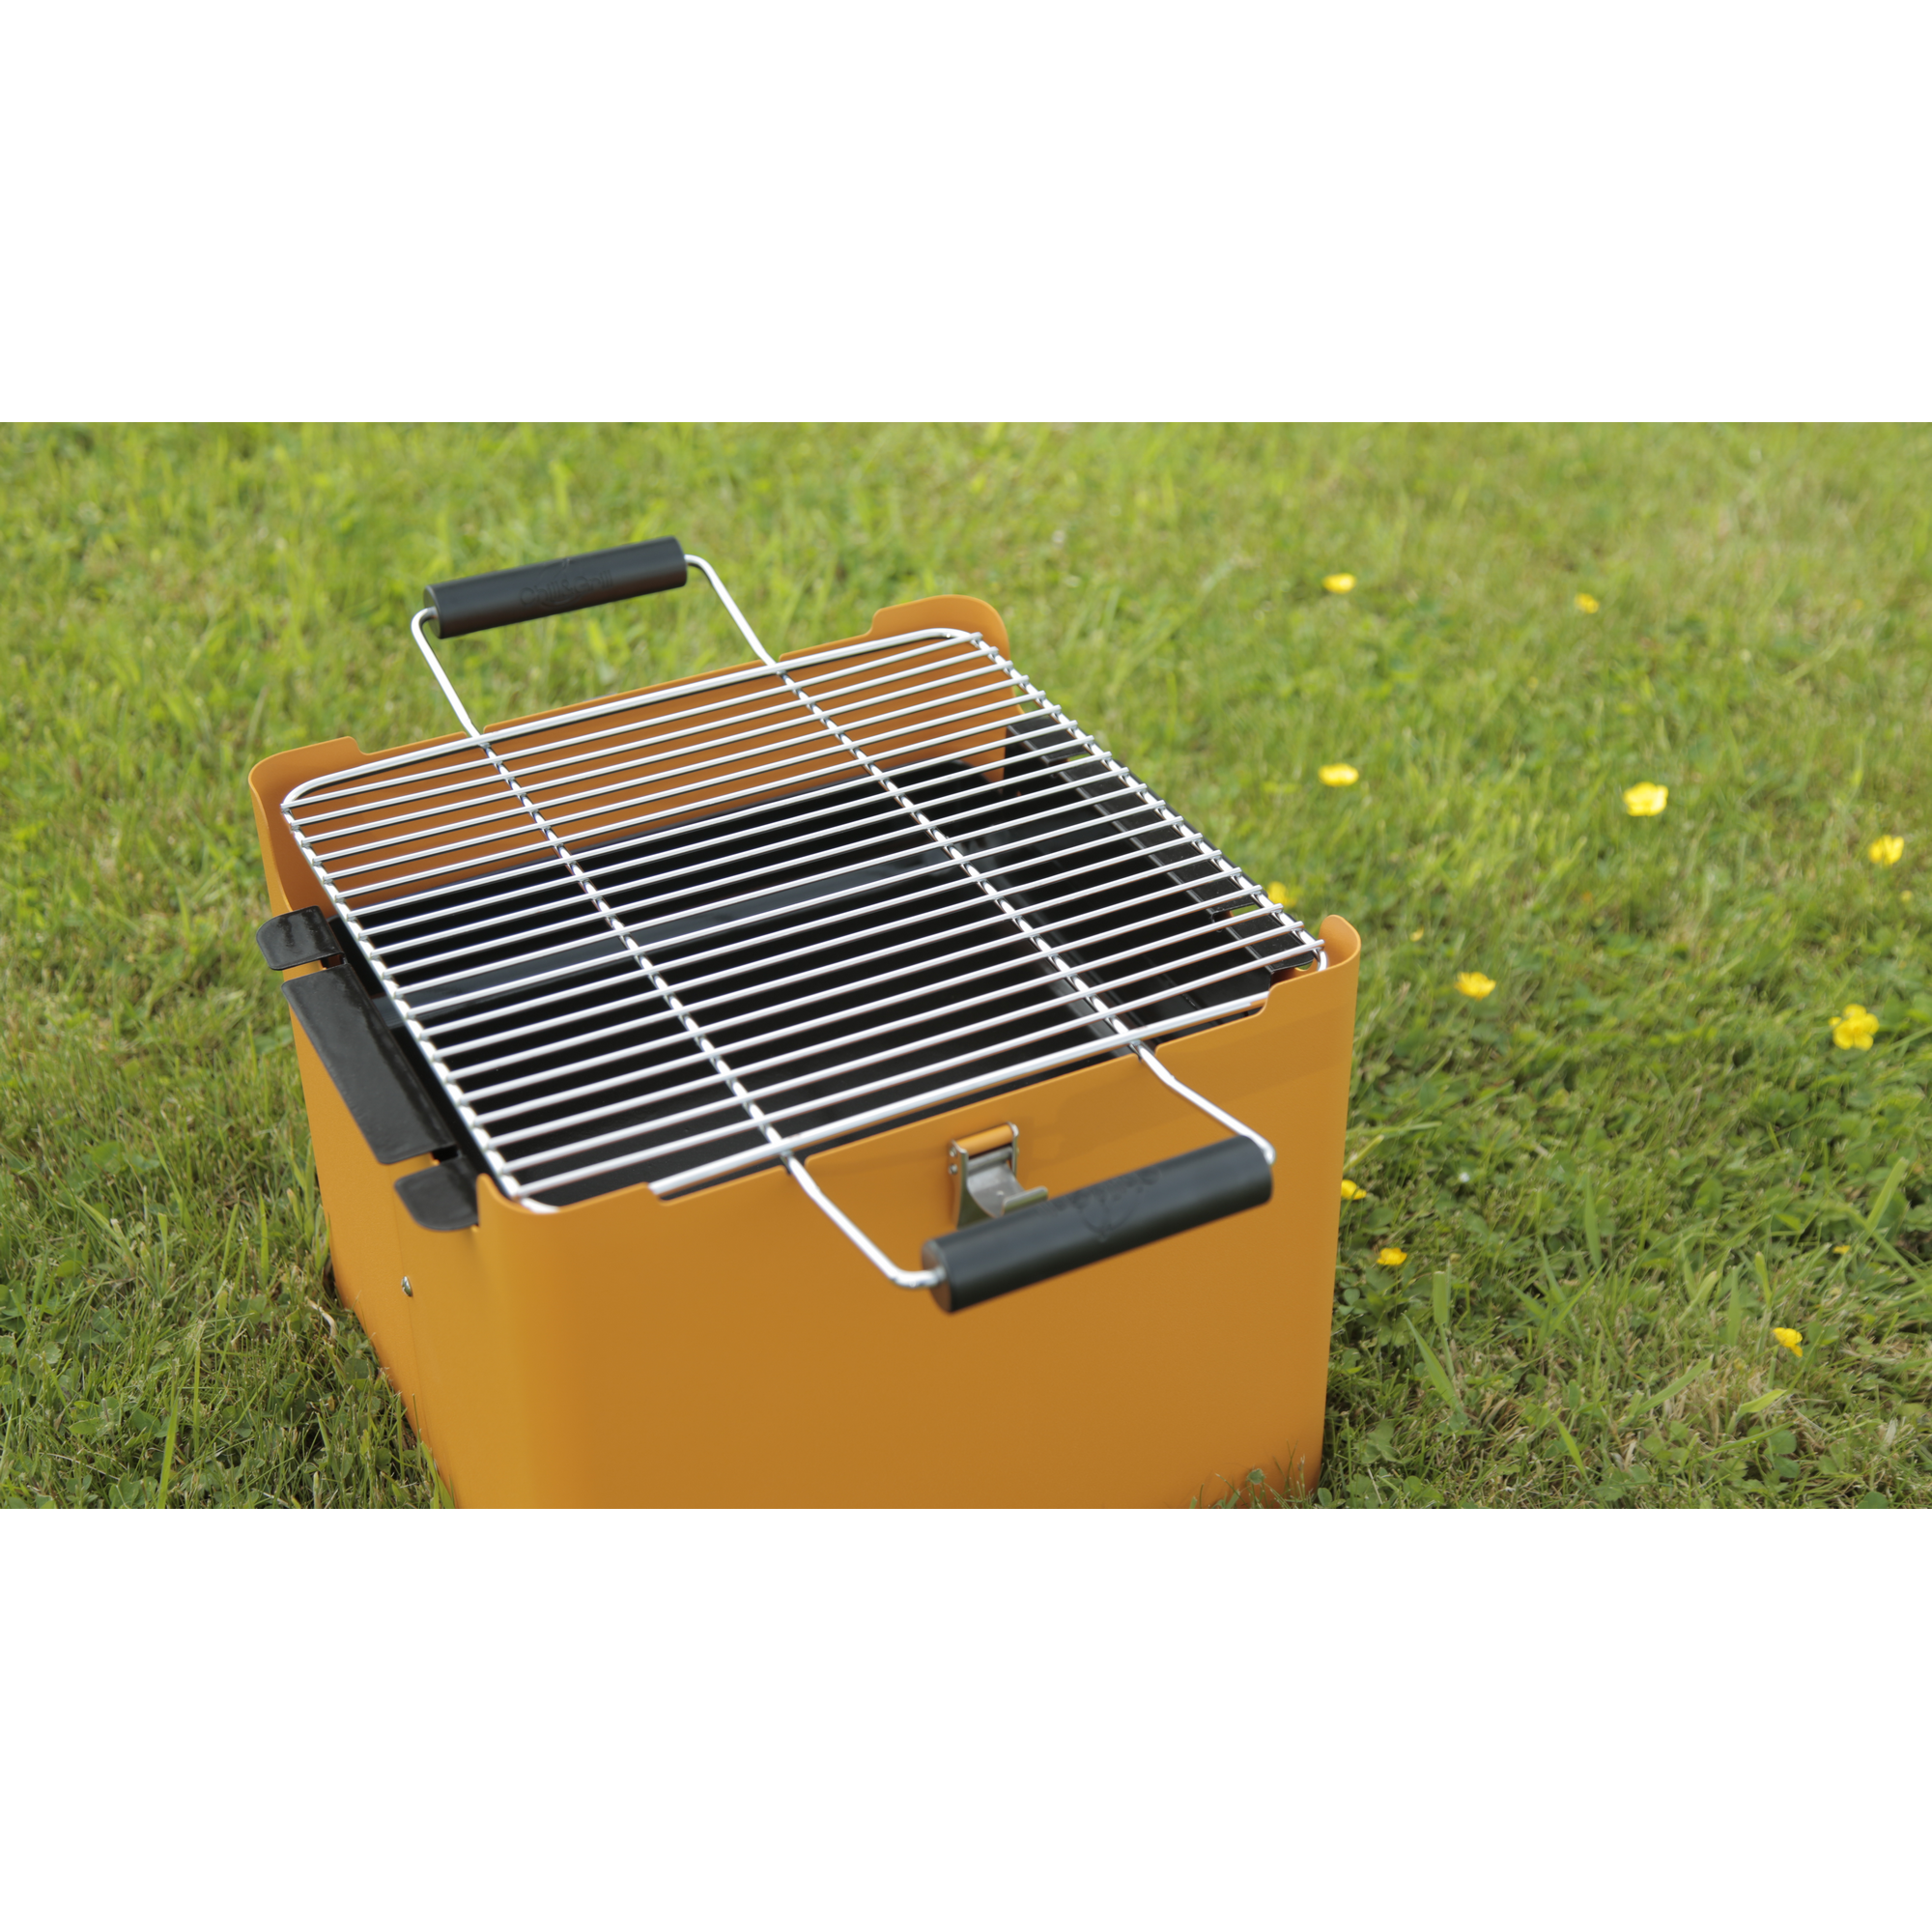 Holzkohlengrill 'Chill&Grill' orange 31,5 x 31,5 cm + product picture